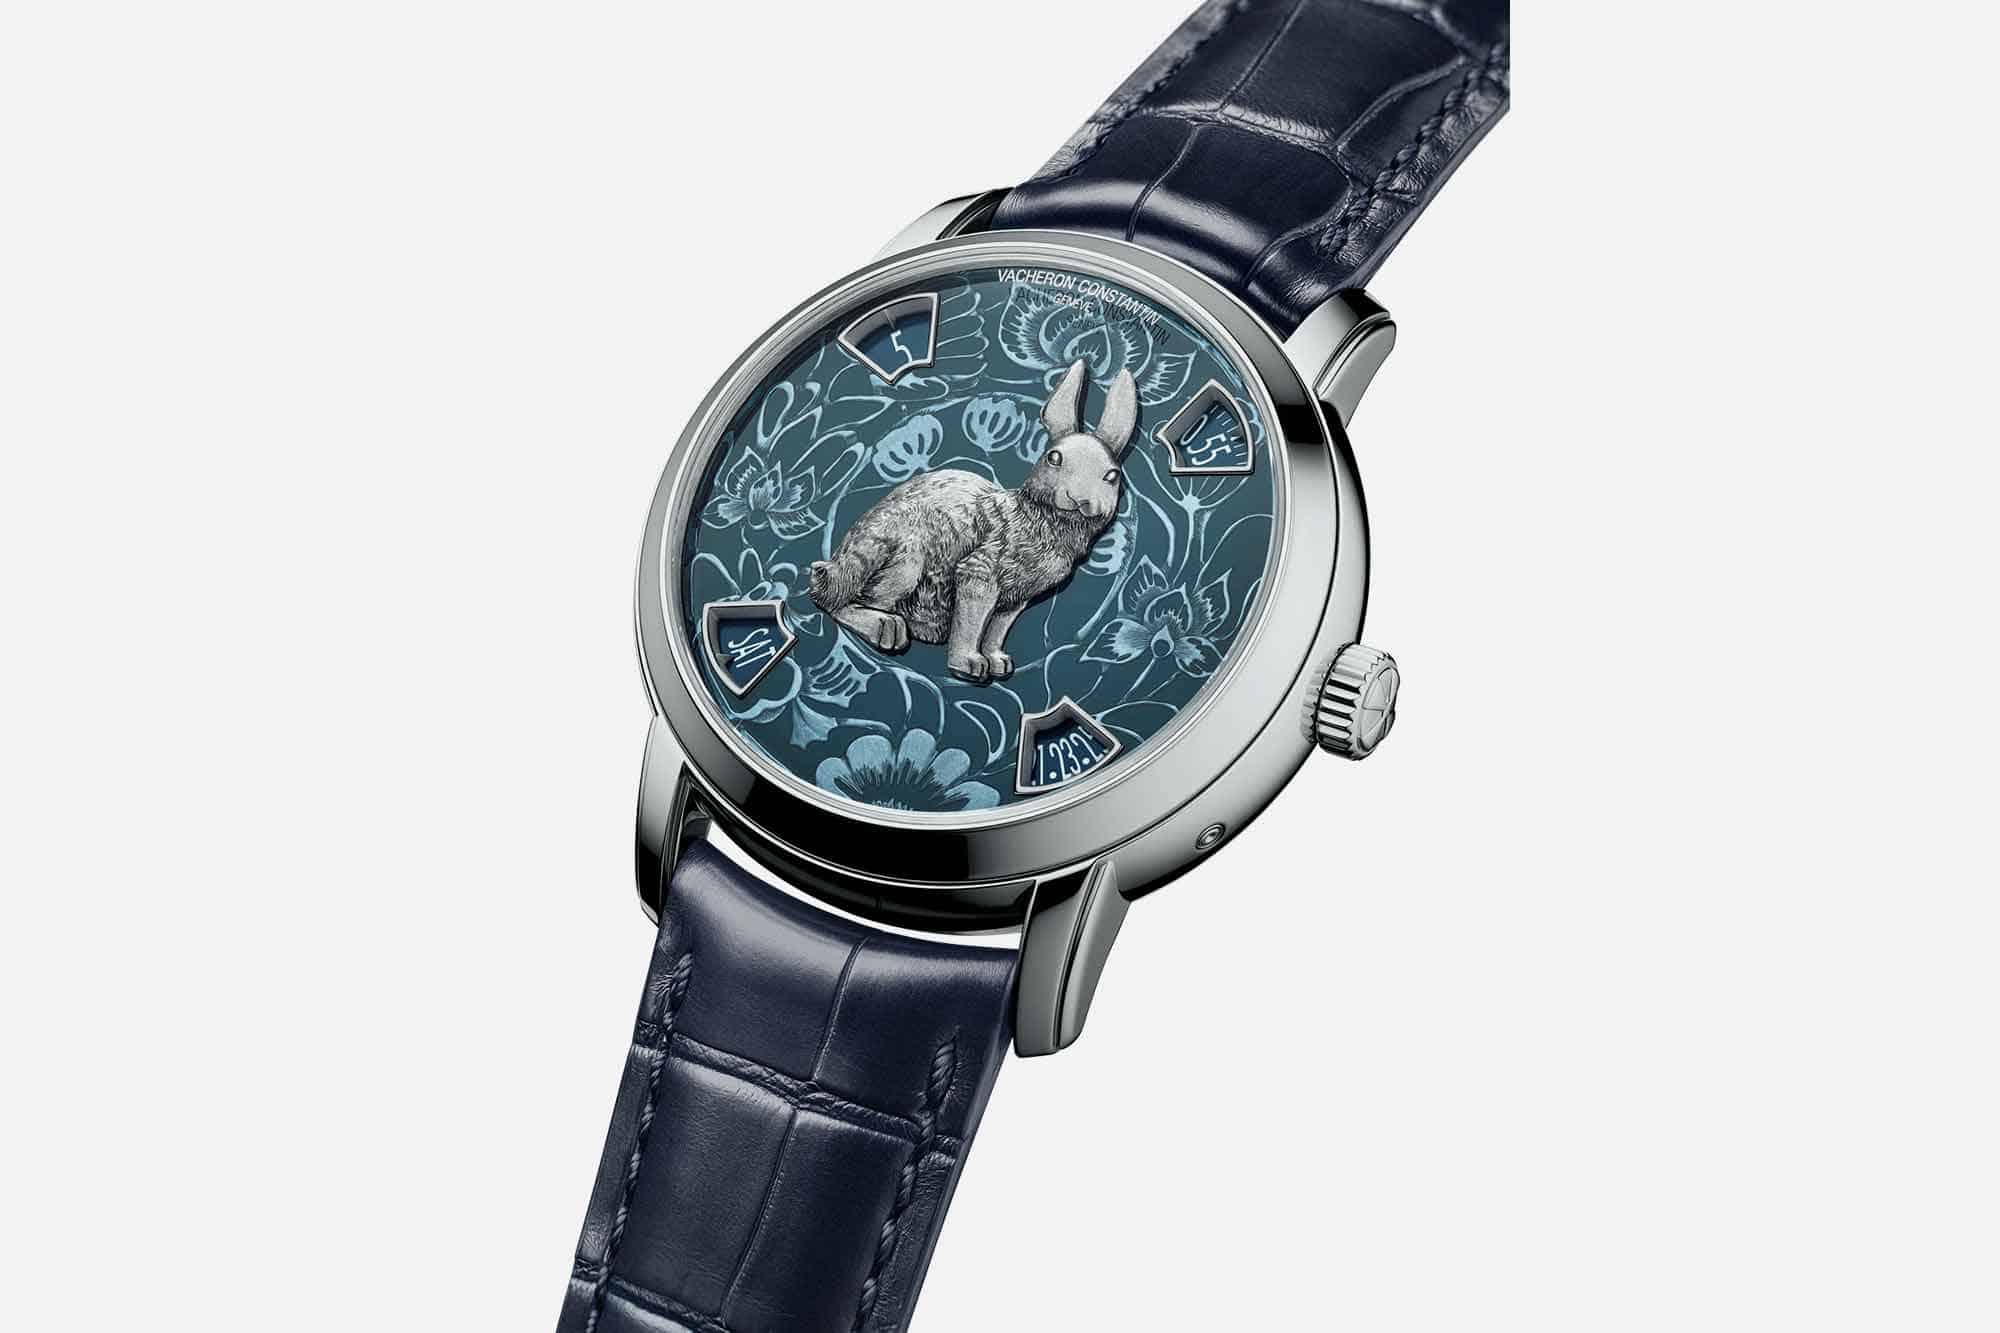 Why I Love It: The Vacheron Constantin Metiers d'Art Lunar New Year Watches,  Plus a Brief Survey of "Year of the Rabbit" Limited Editions - Worn & Wound